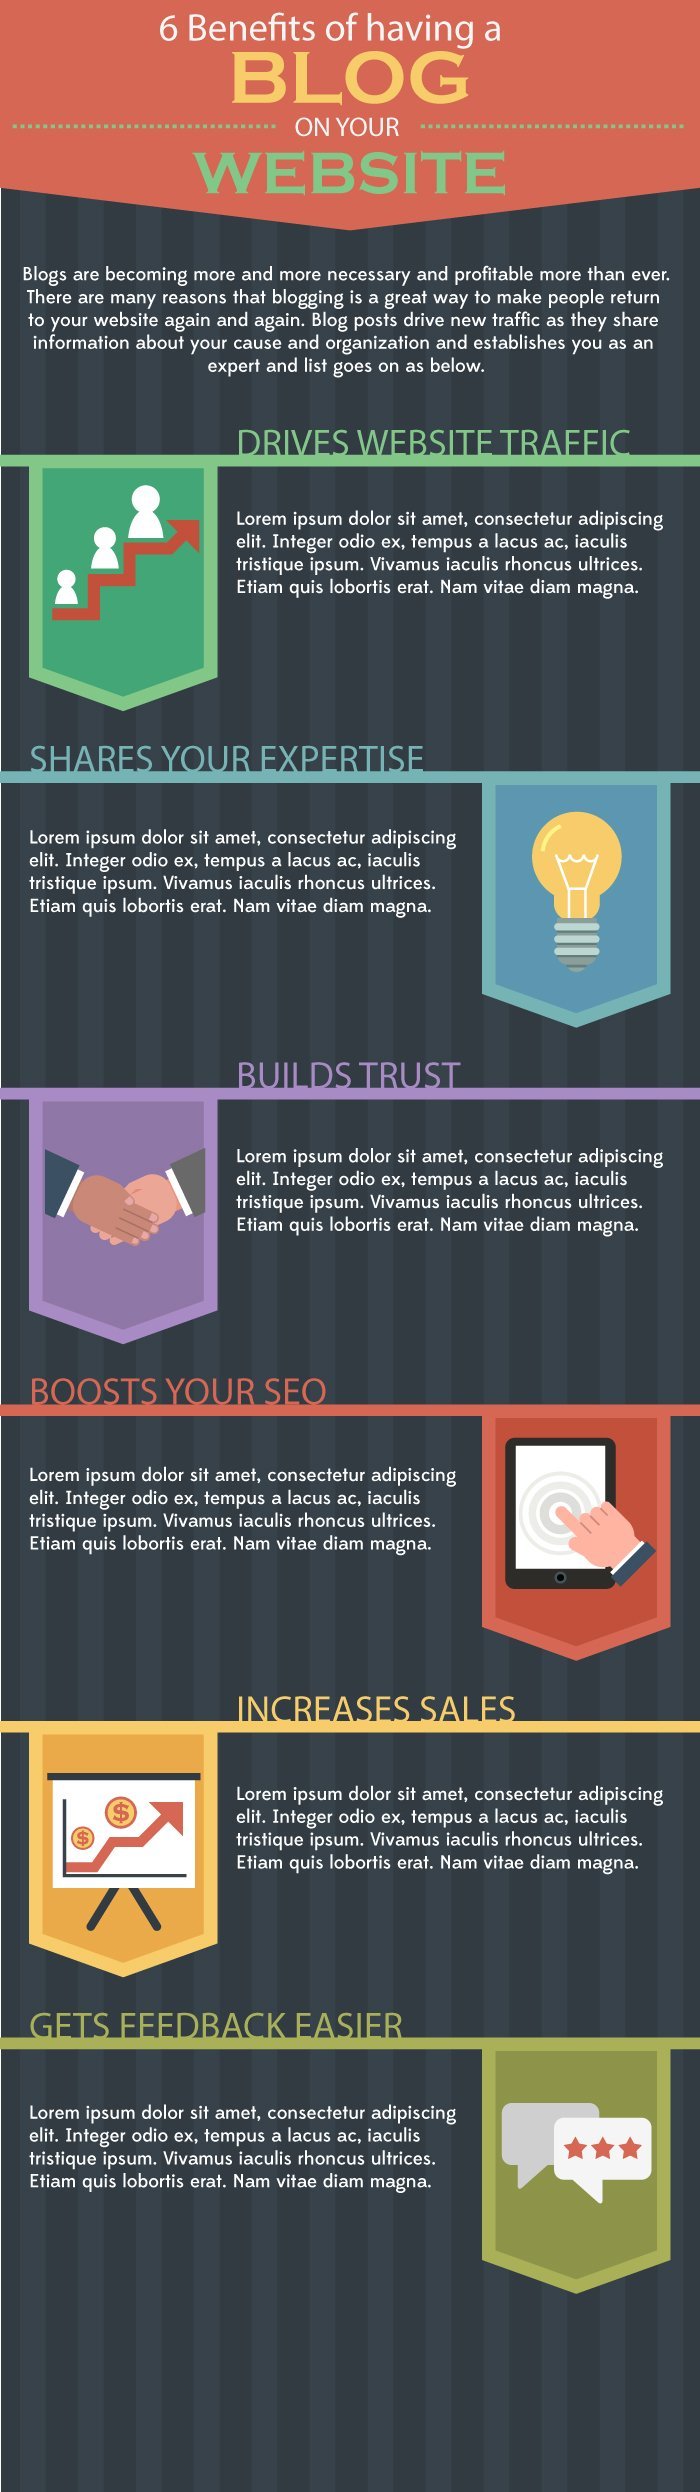 infographic_blog-on-your-website